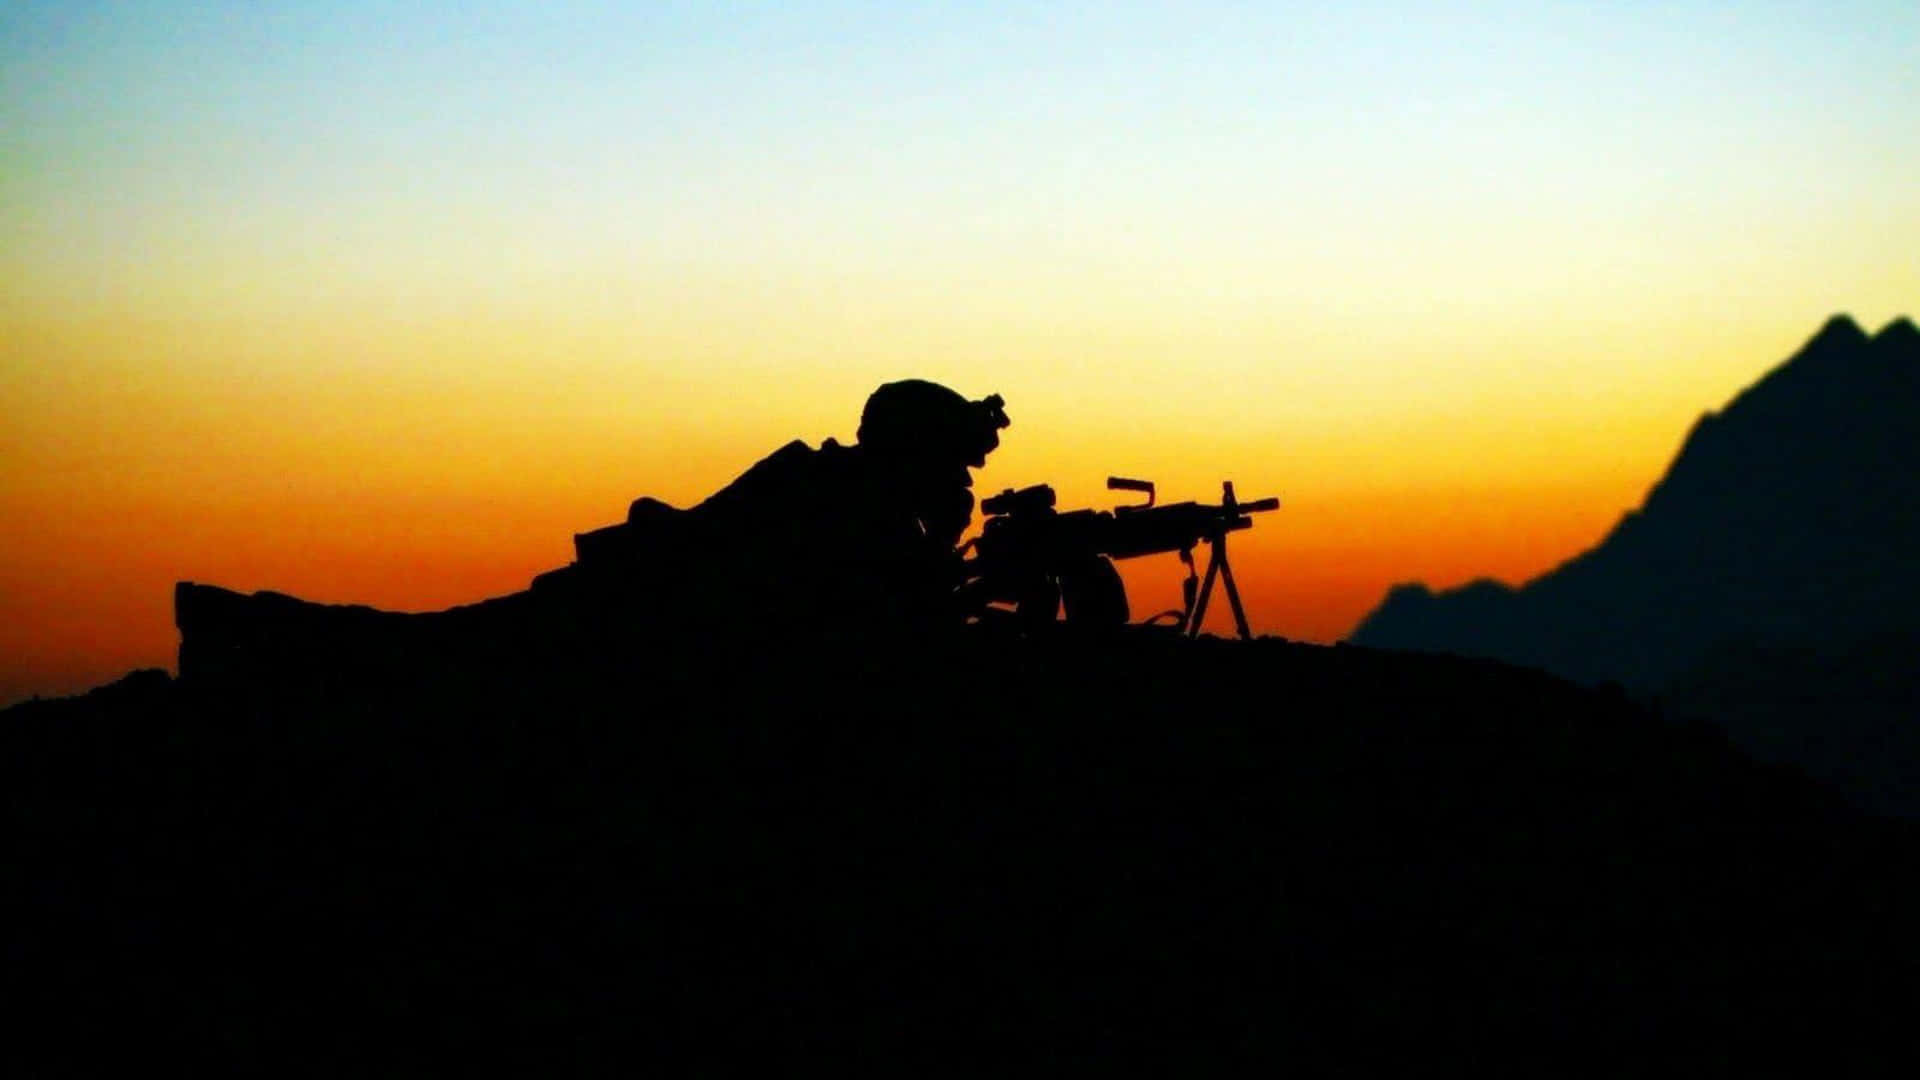 A Silhouette Of A Soldier On Top Of A Mountain